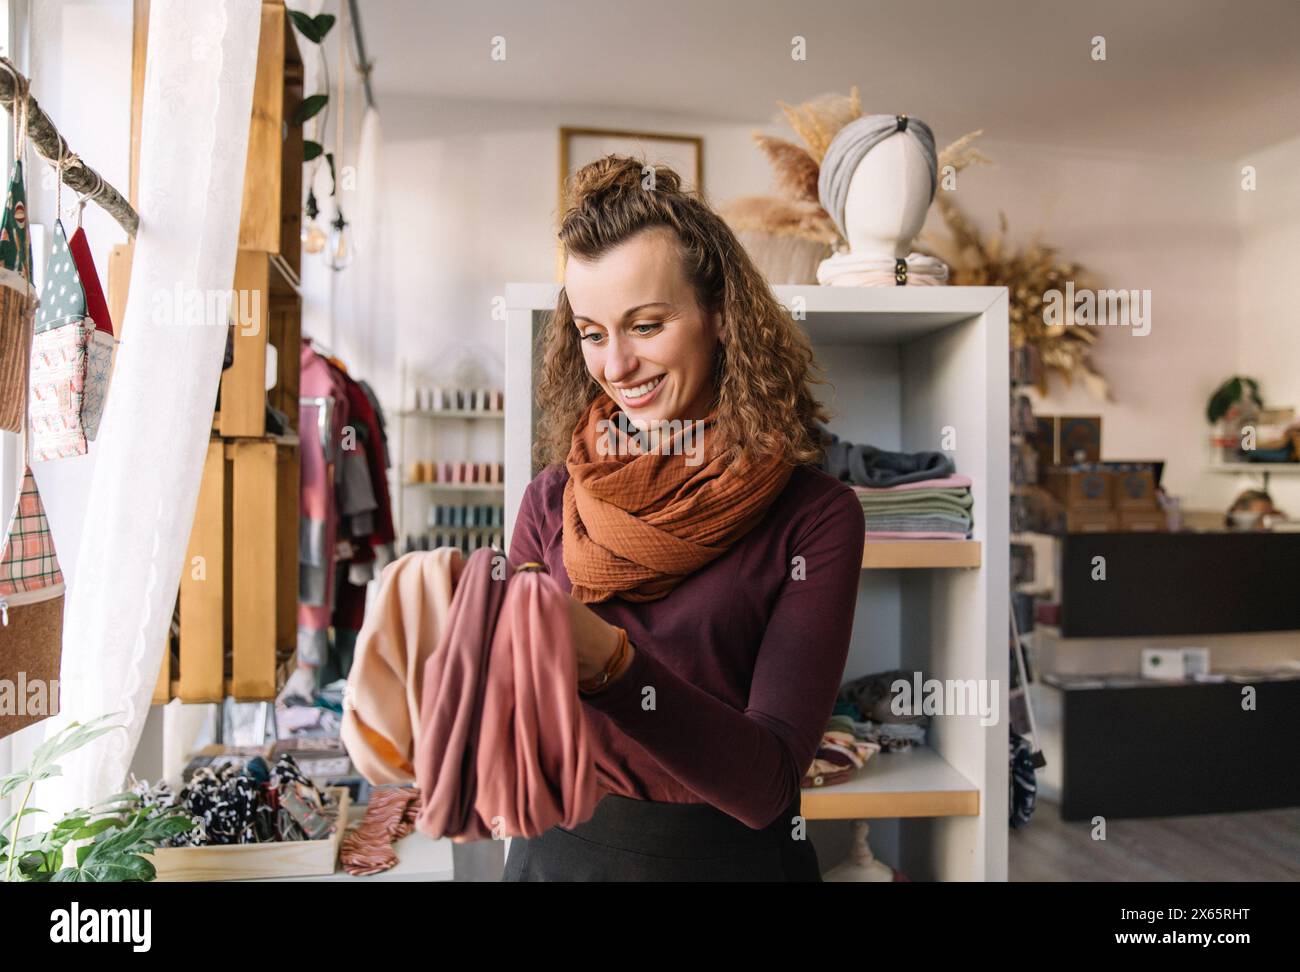 Woman Happily Exploring Fabric Choices in a Boutique Craft Shop Stock Photo